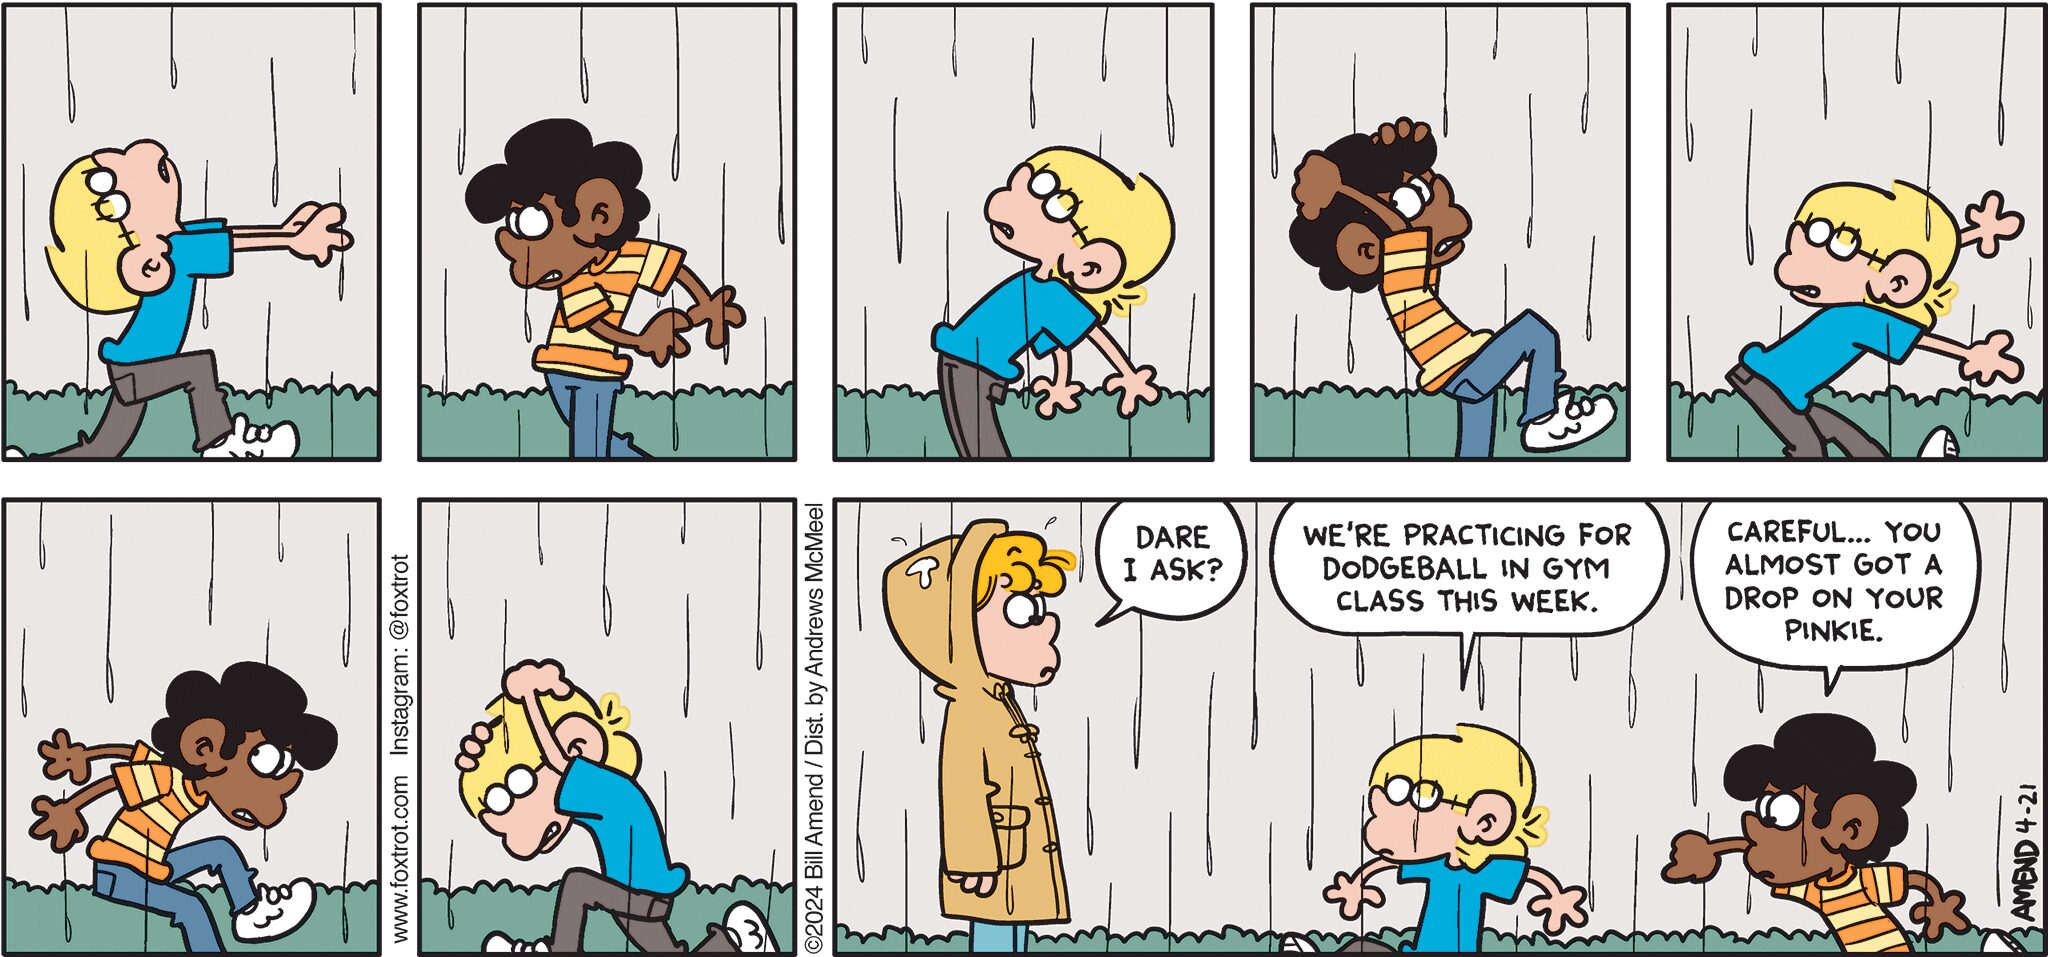 FoxTrot comic strip by Bill Amend - "Dry Run" published April 21, 2024 - Transcript: Paige Fox: Dare I ask? Jason Fox: We're practicing for dodgeball in gym class this week. Marcus: Careful... you almost got a drop on your pinkie.